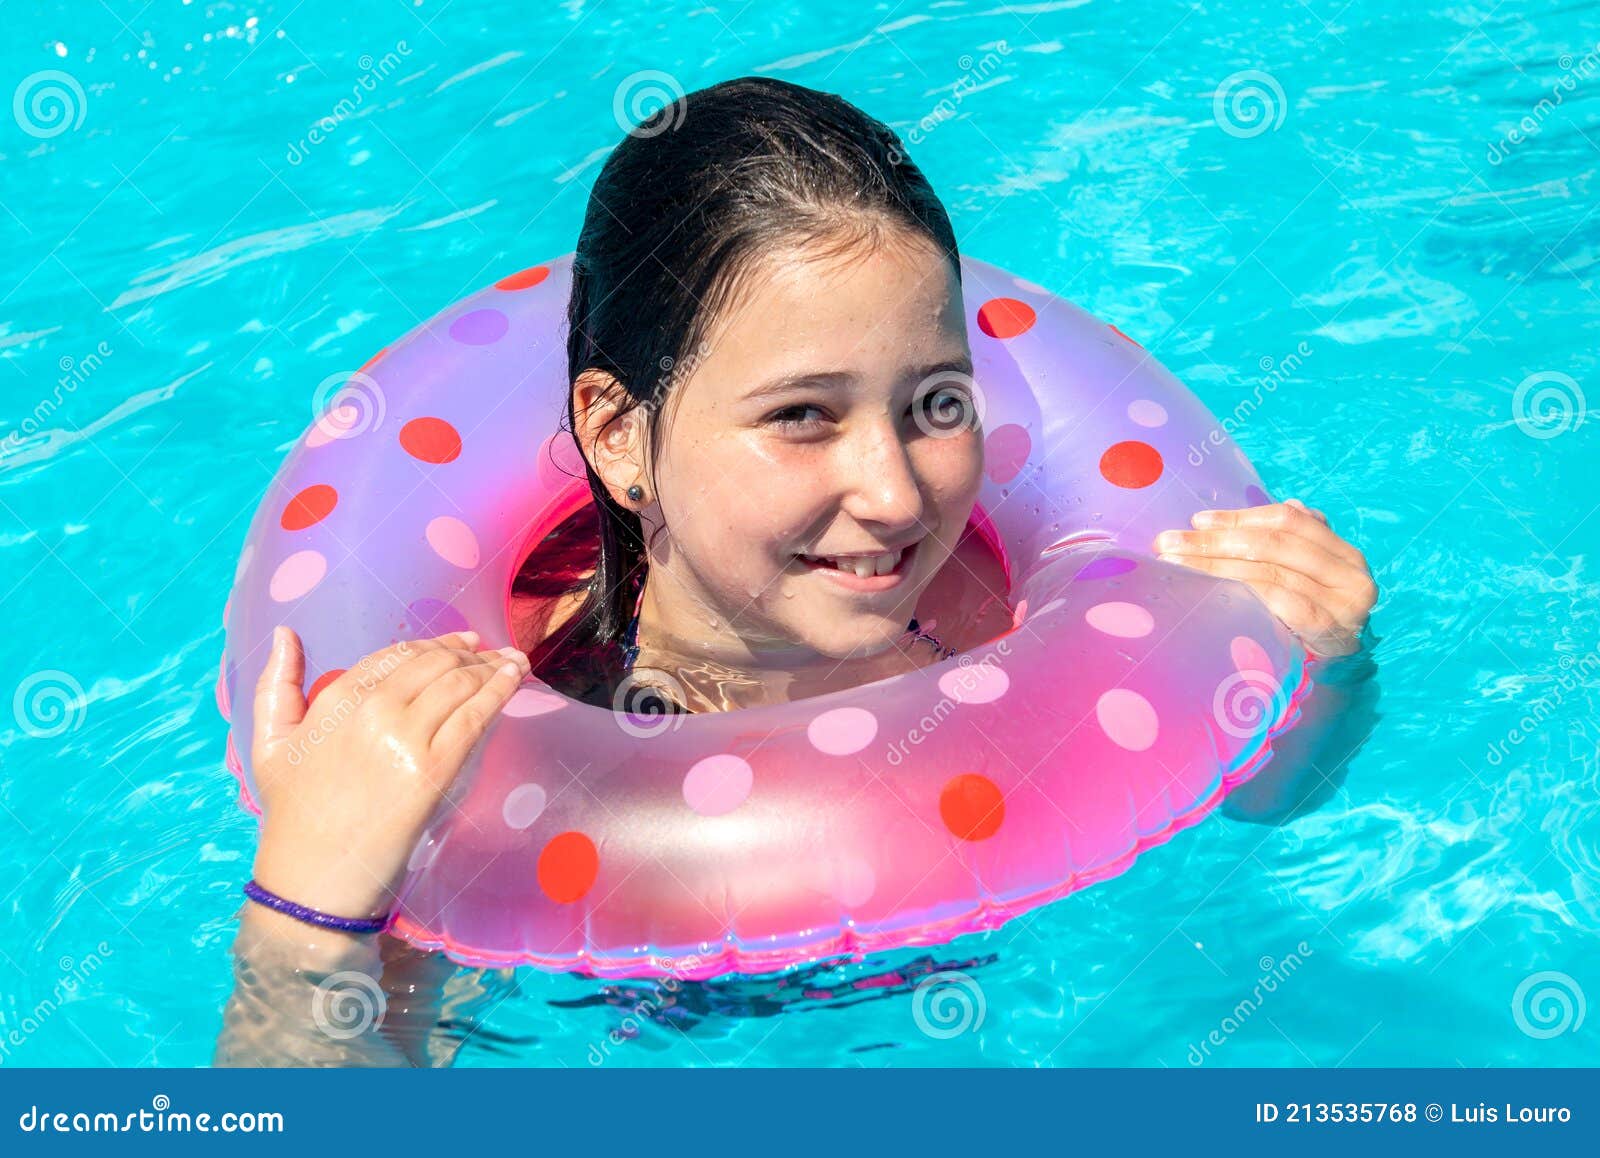 Kid in a swimming pool stock photo. Image of vacations - 213535768